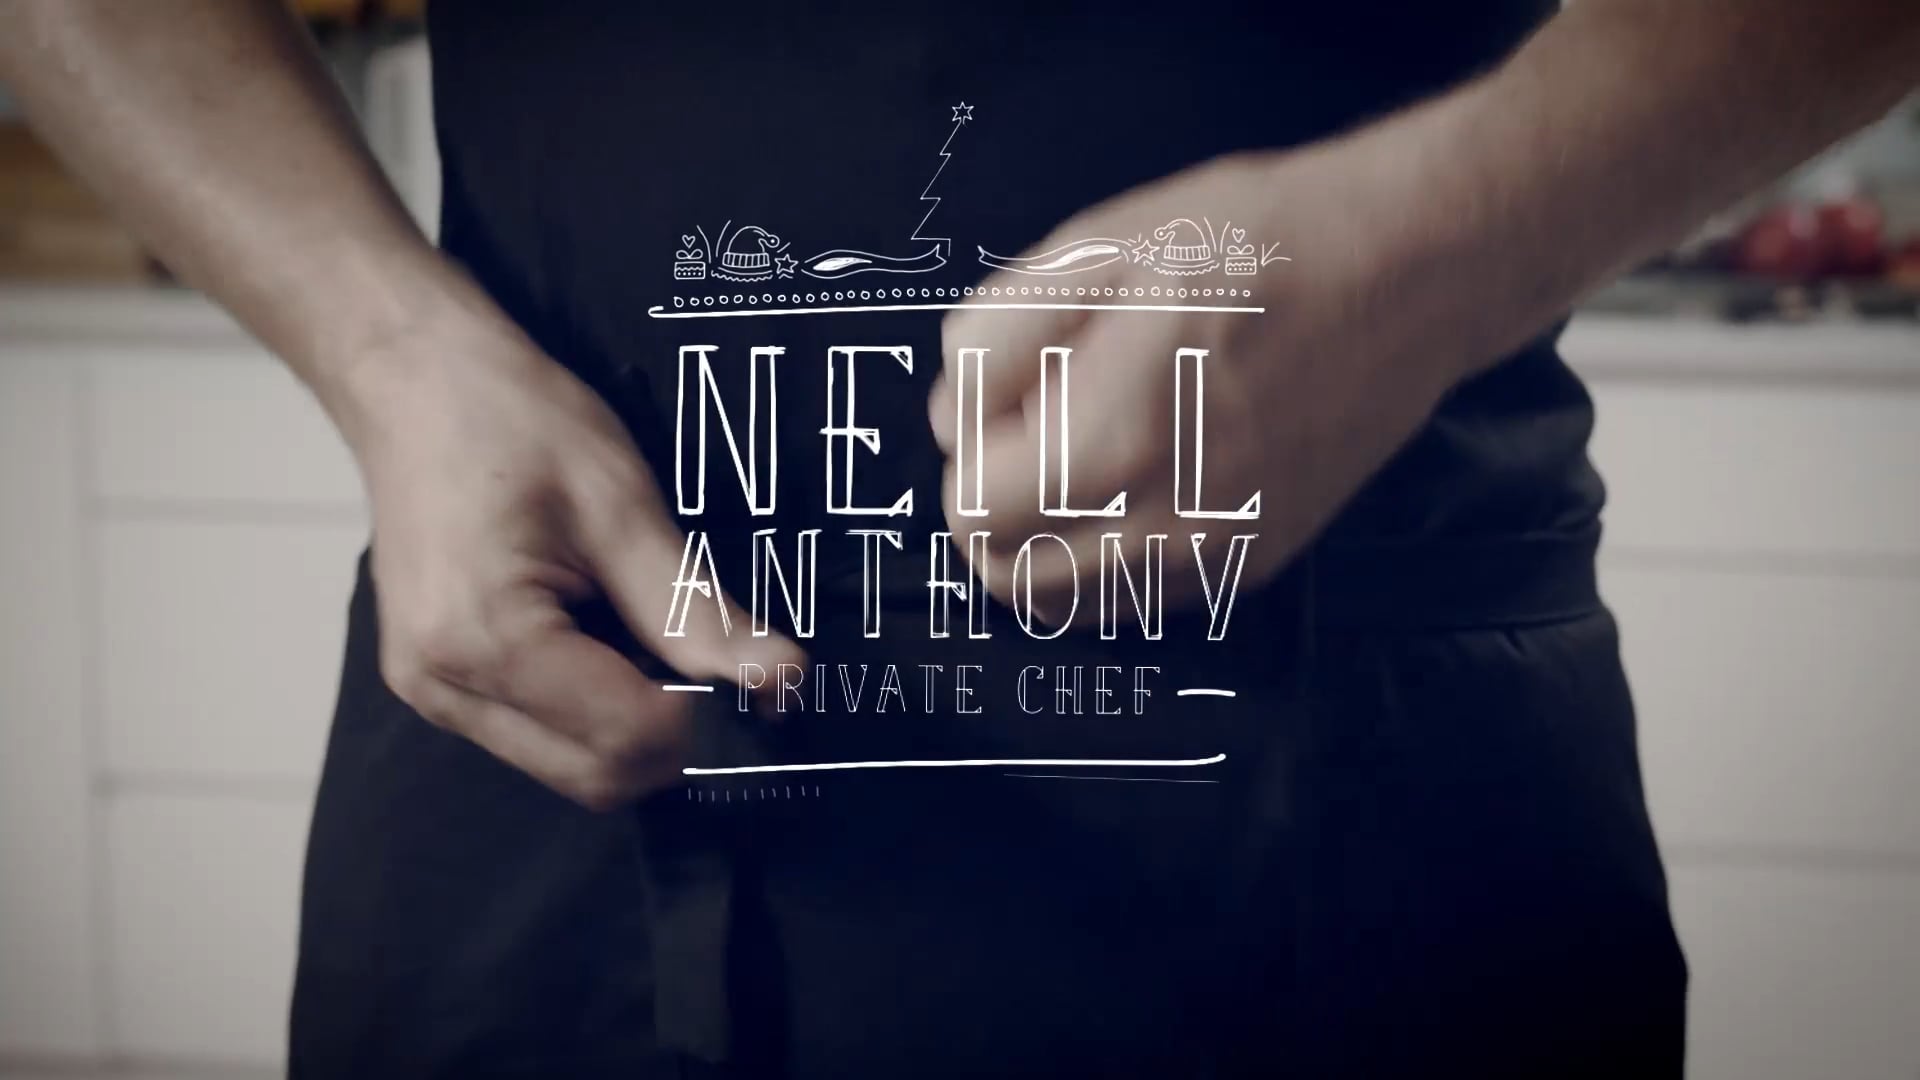 Neill Anthony Private Chef Season 3